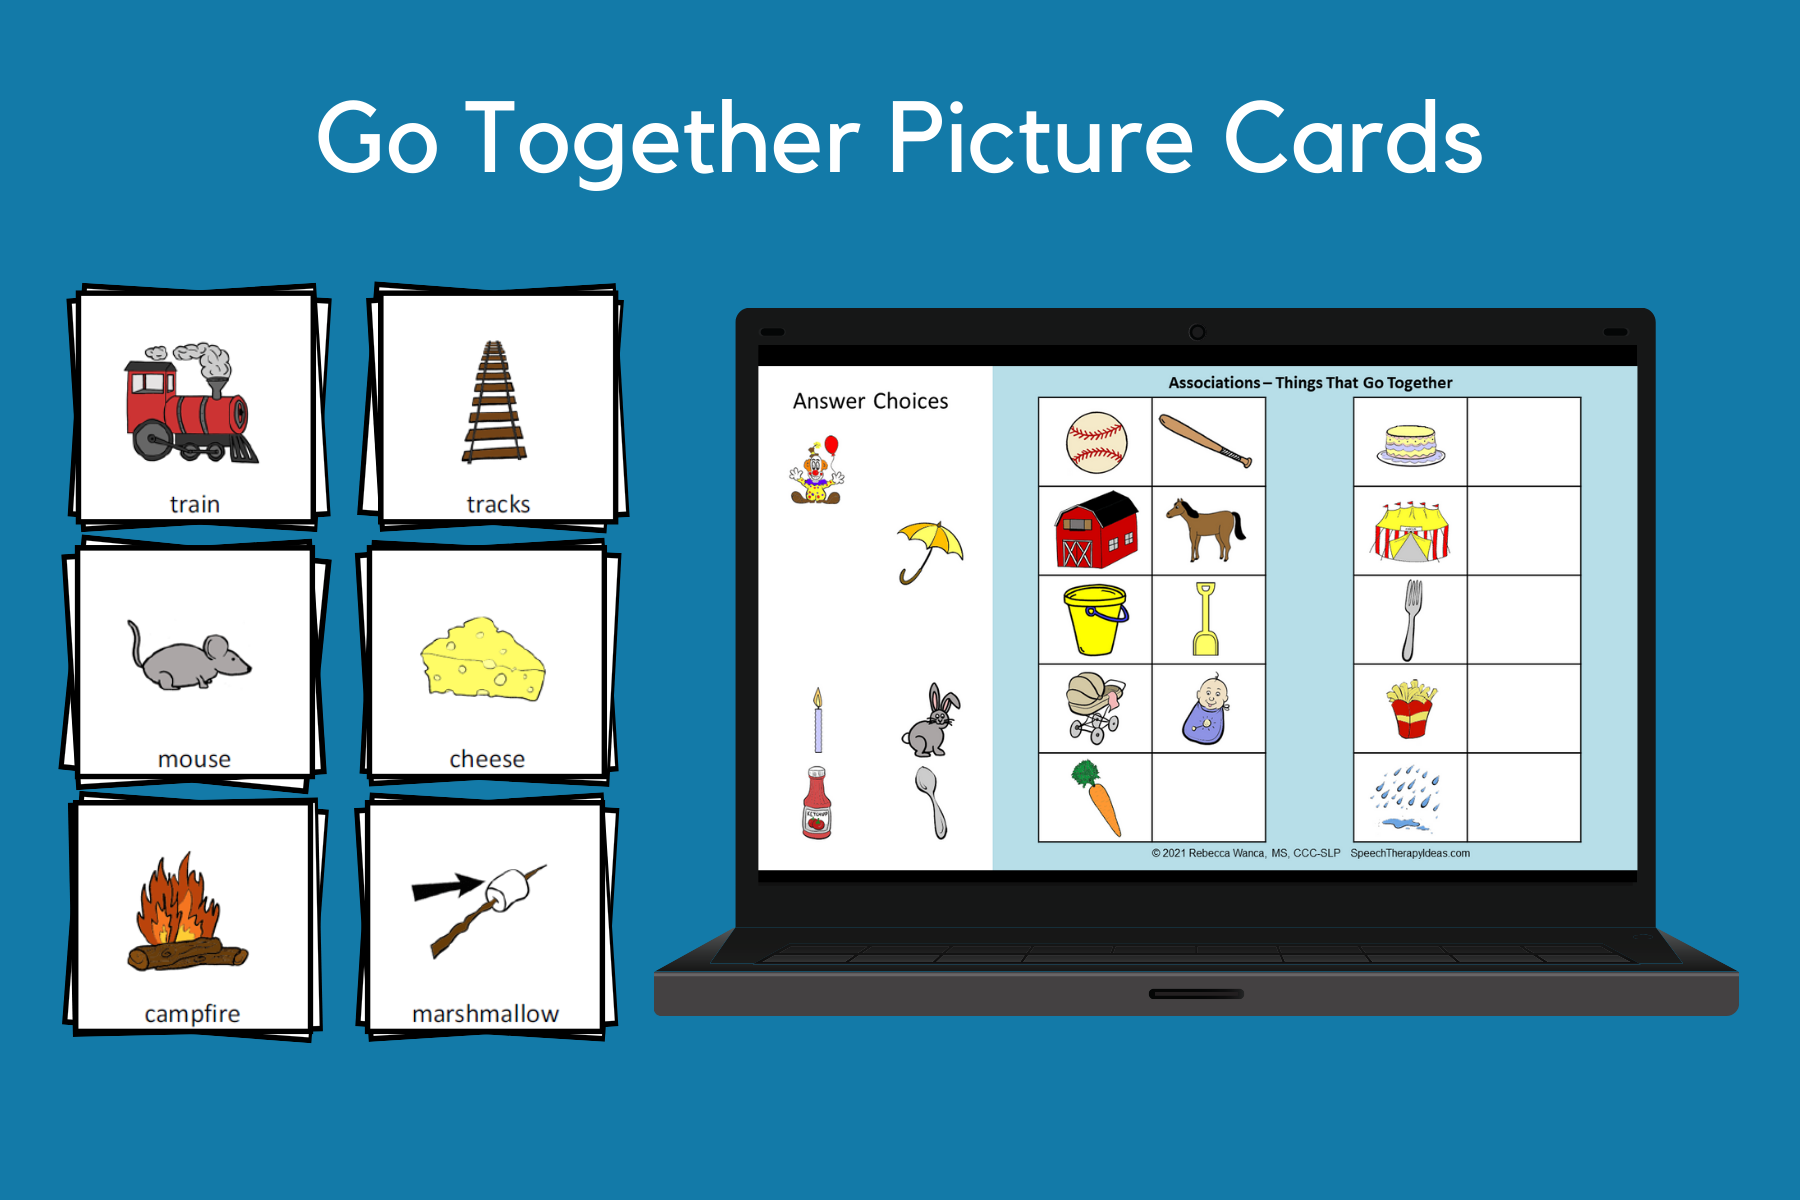 Go Together Picture Cards